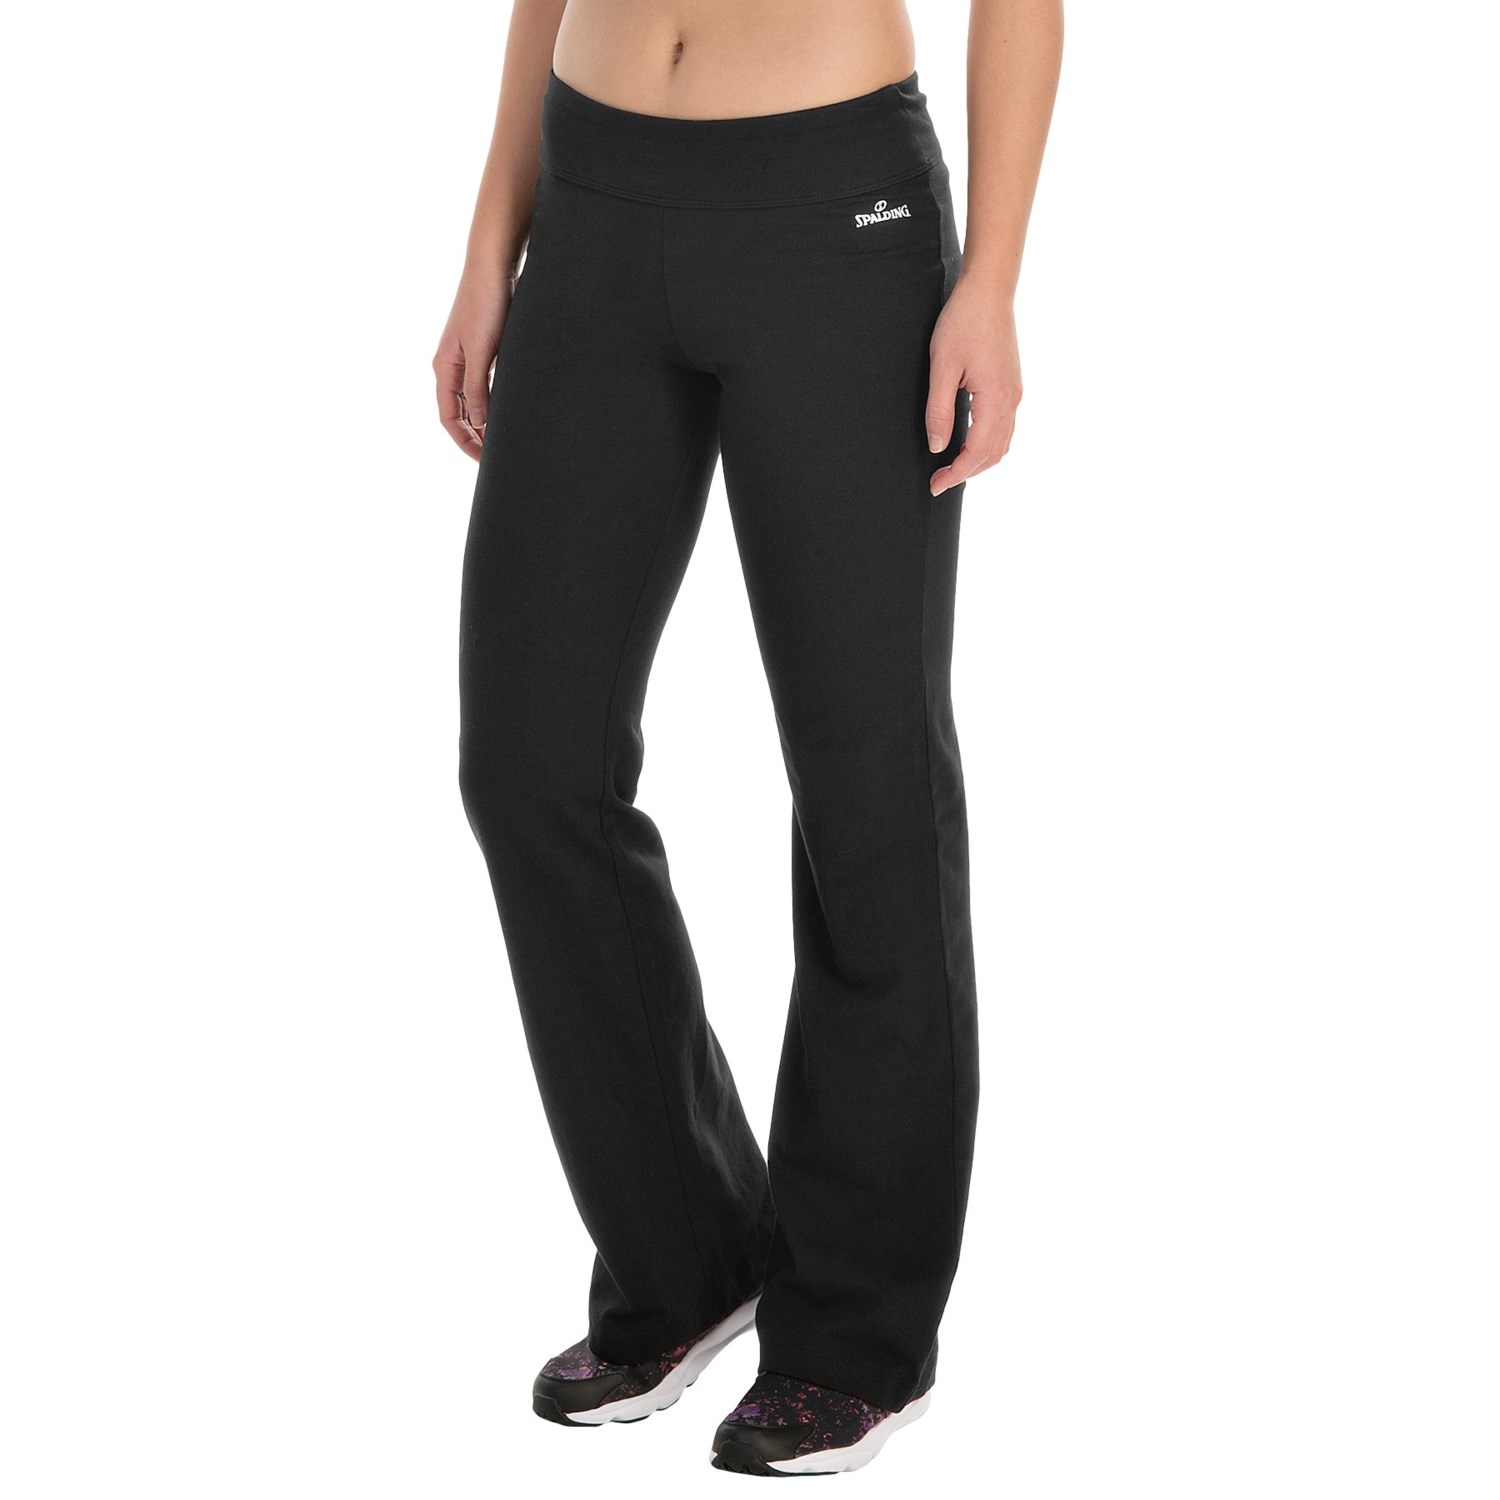 Spalding Stretch-Knit Bootcut Pants (For Women) - Save 35%